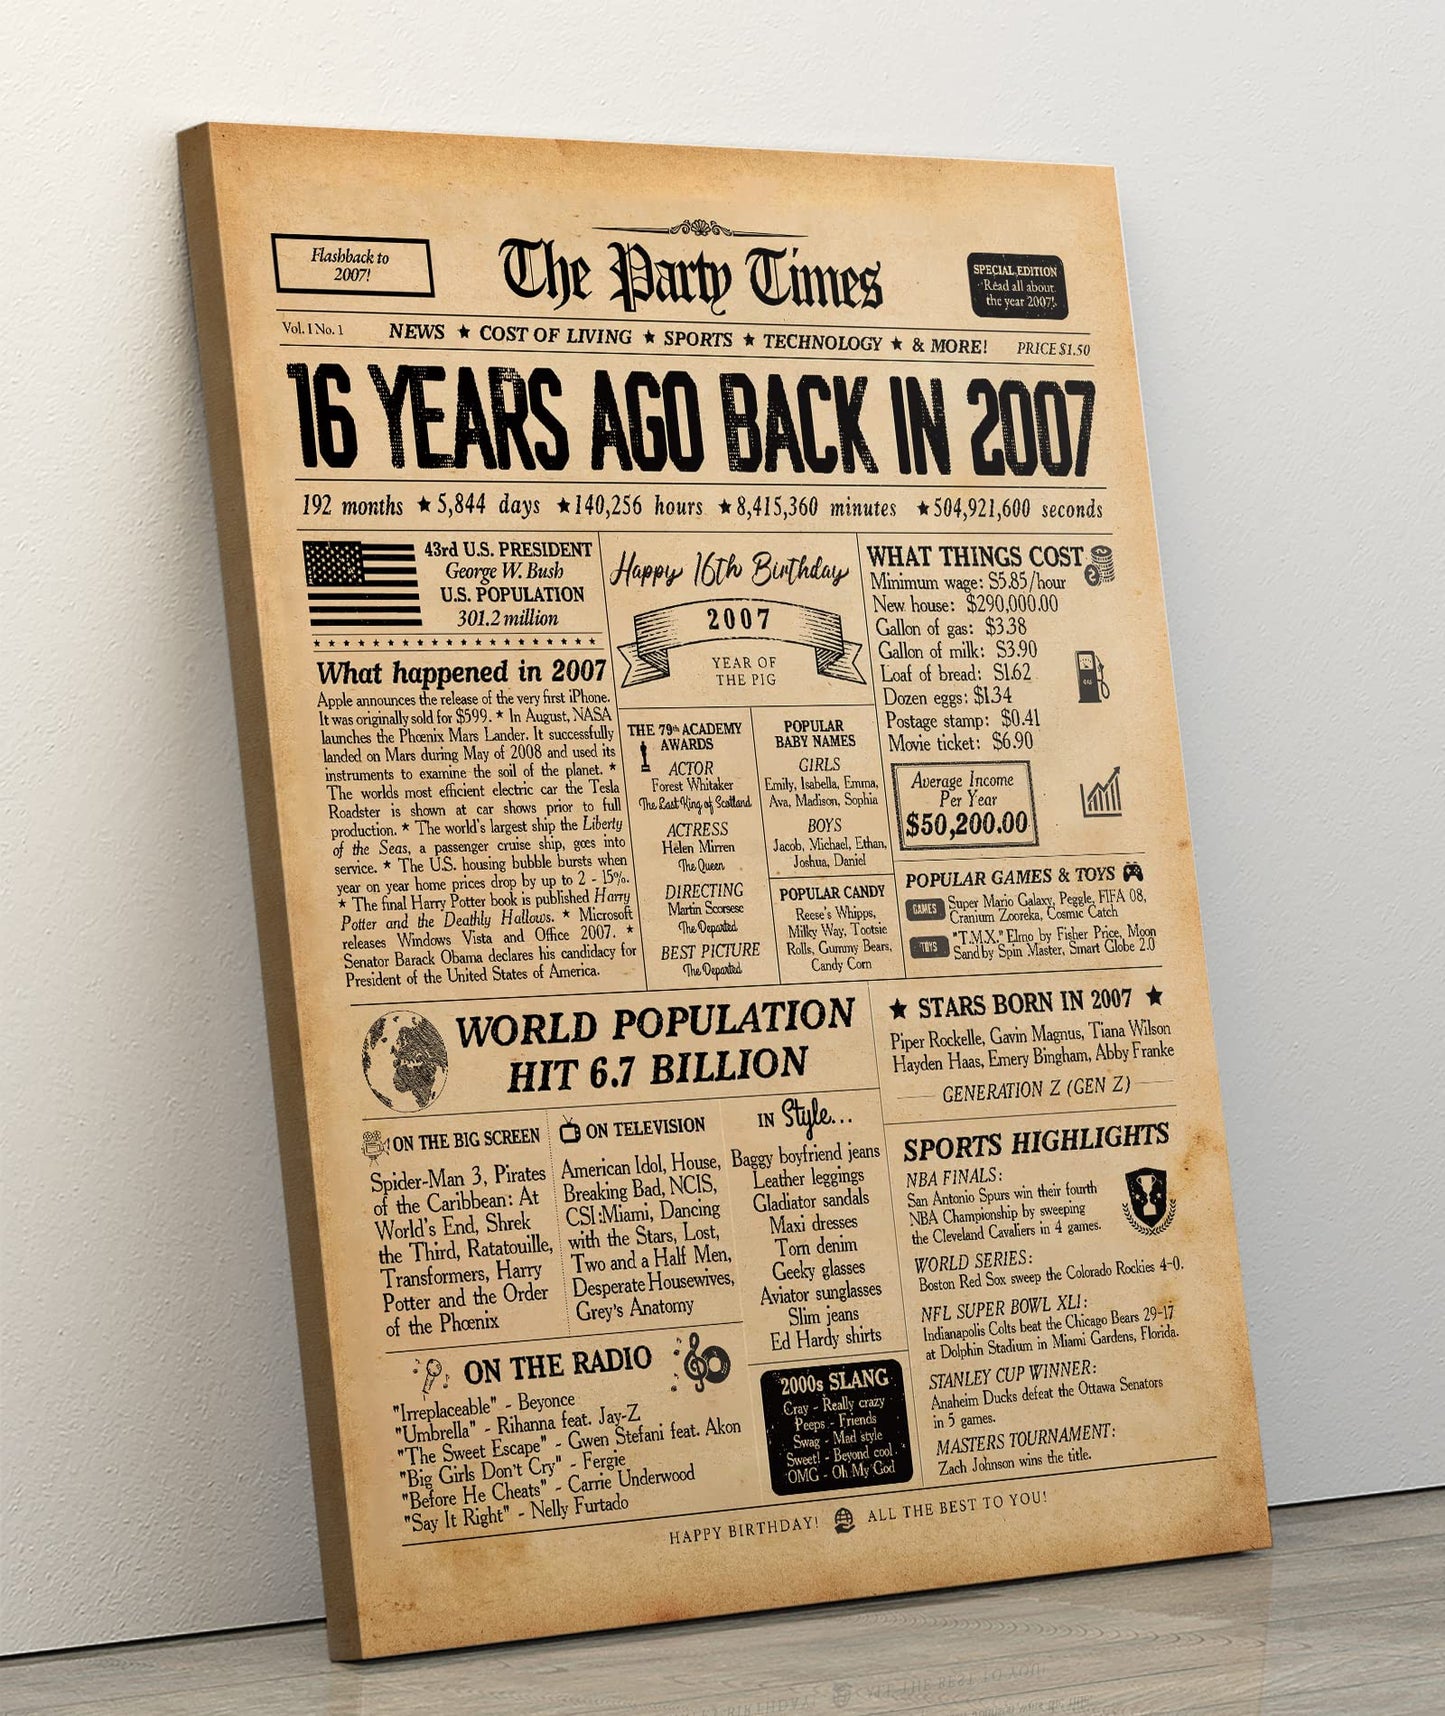 16th Birthday Newspaper Wall Art Canvas Poster Decorative with Frame (11.5×15 inch), Back in 2007 Print 2007 birthday poster Vintage 16th Birthday Decorations Poster for Teens Home Wall Decor, SRZT16S